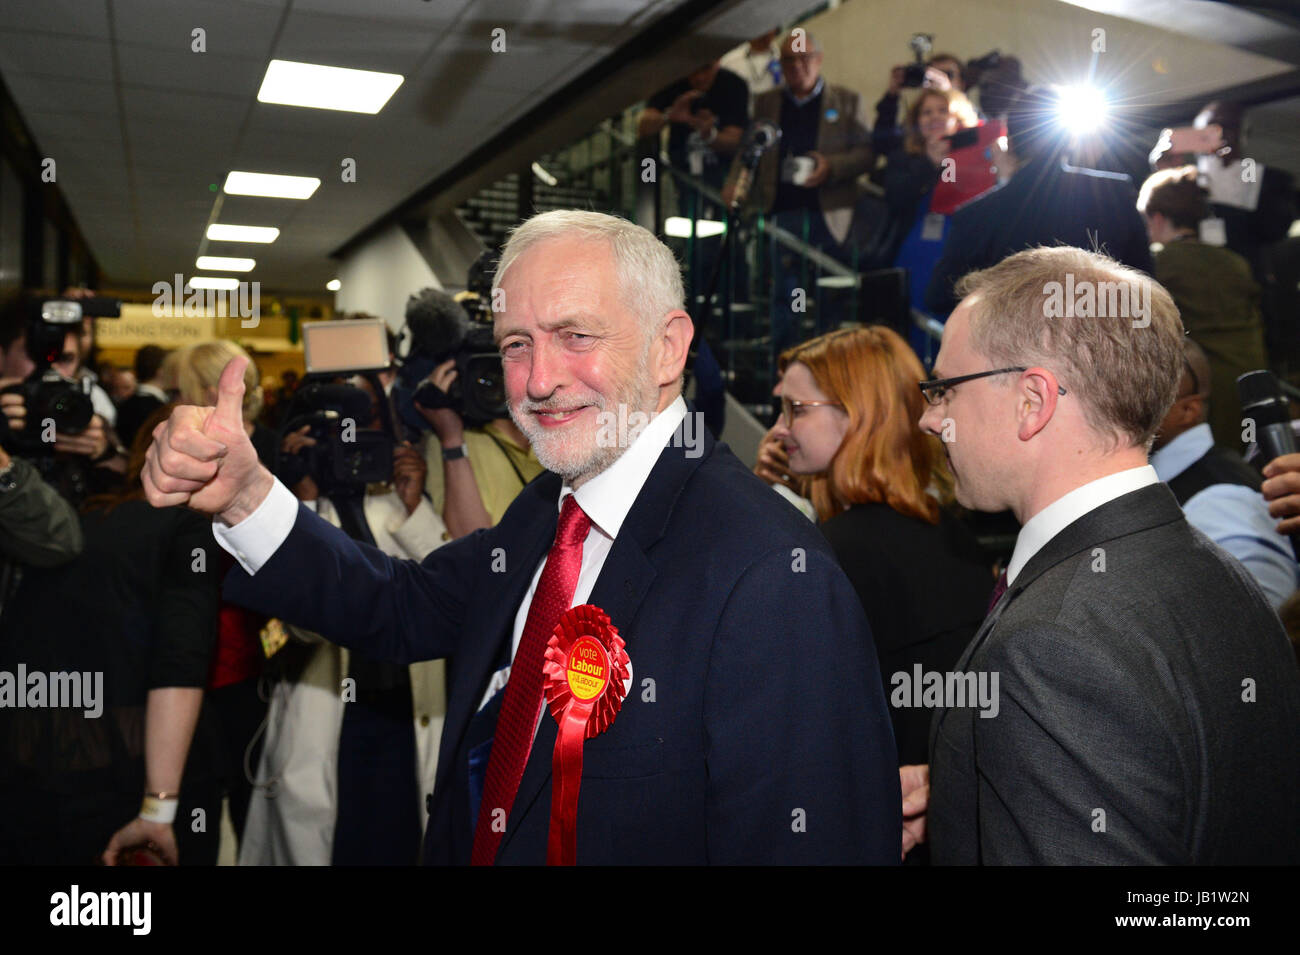 Labour leader Jeremy Corbyn arrives at the Sobell Leisure Centre in Islington, north London, where counting is taking place for the General Election. Stock Photo